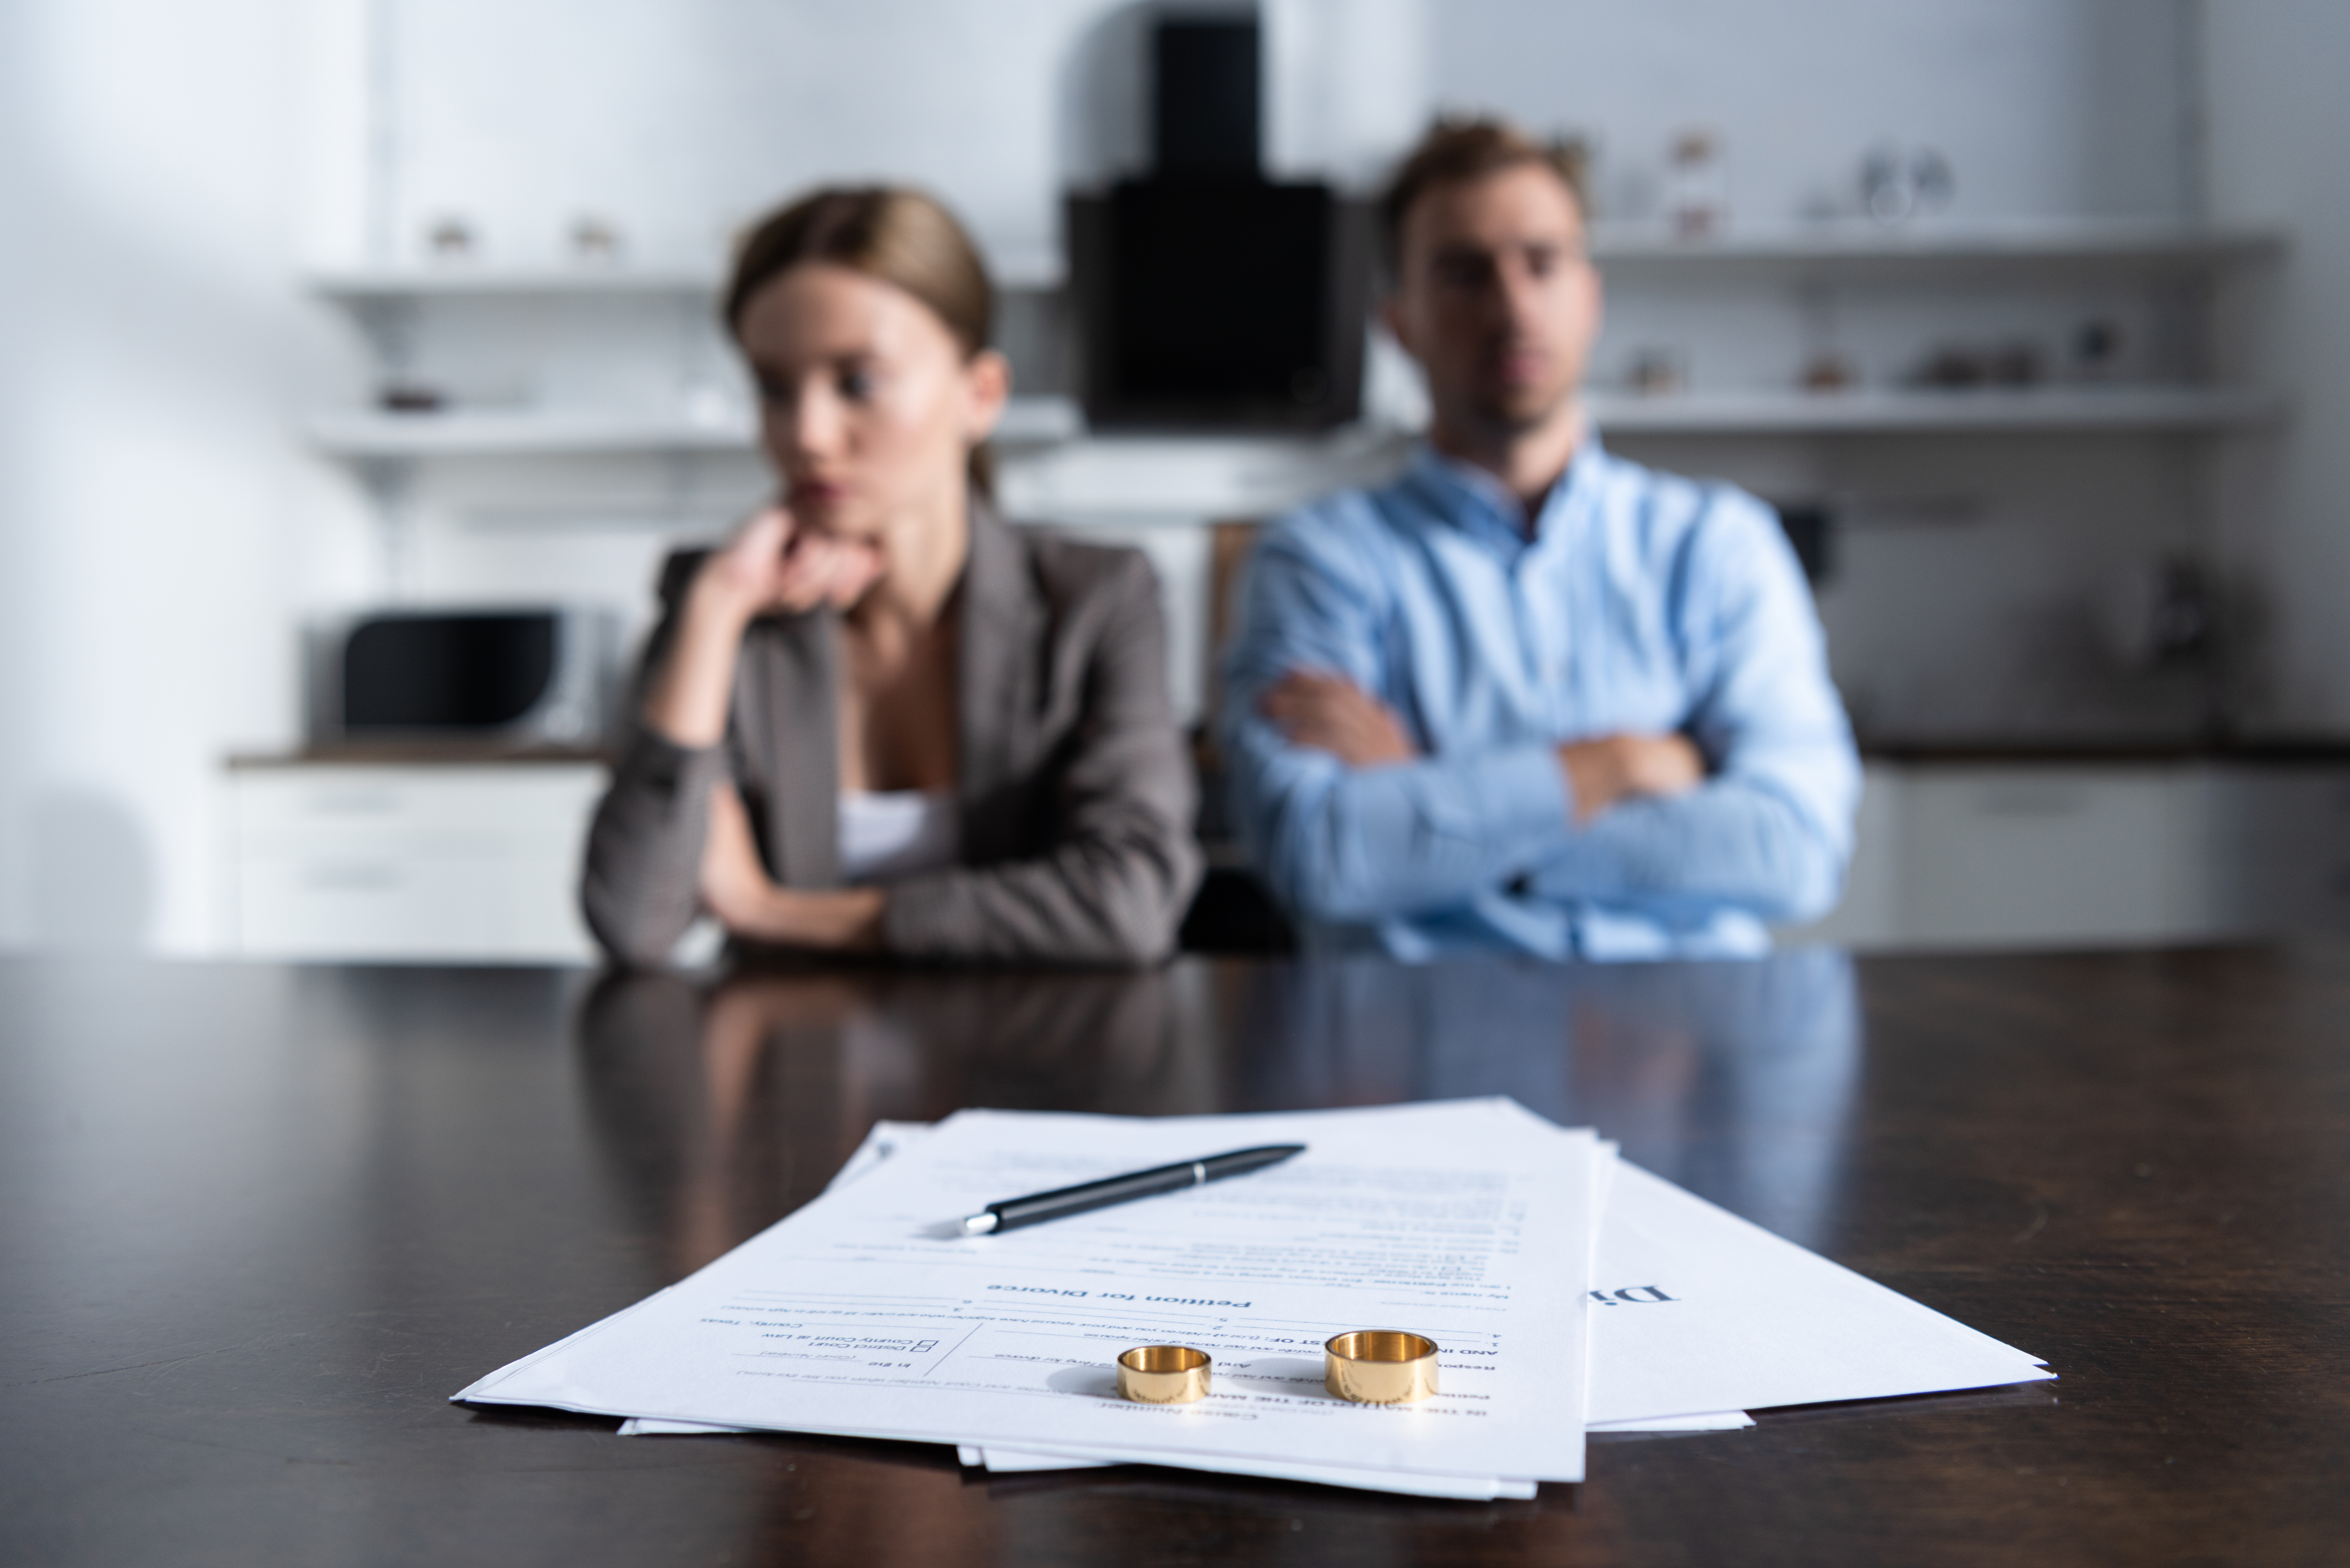 A couple sitting at a table with divorce documents | Source: Shutterstock